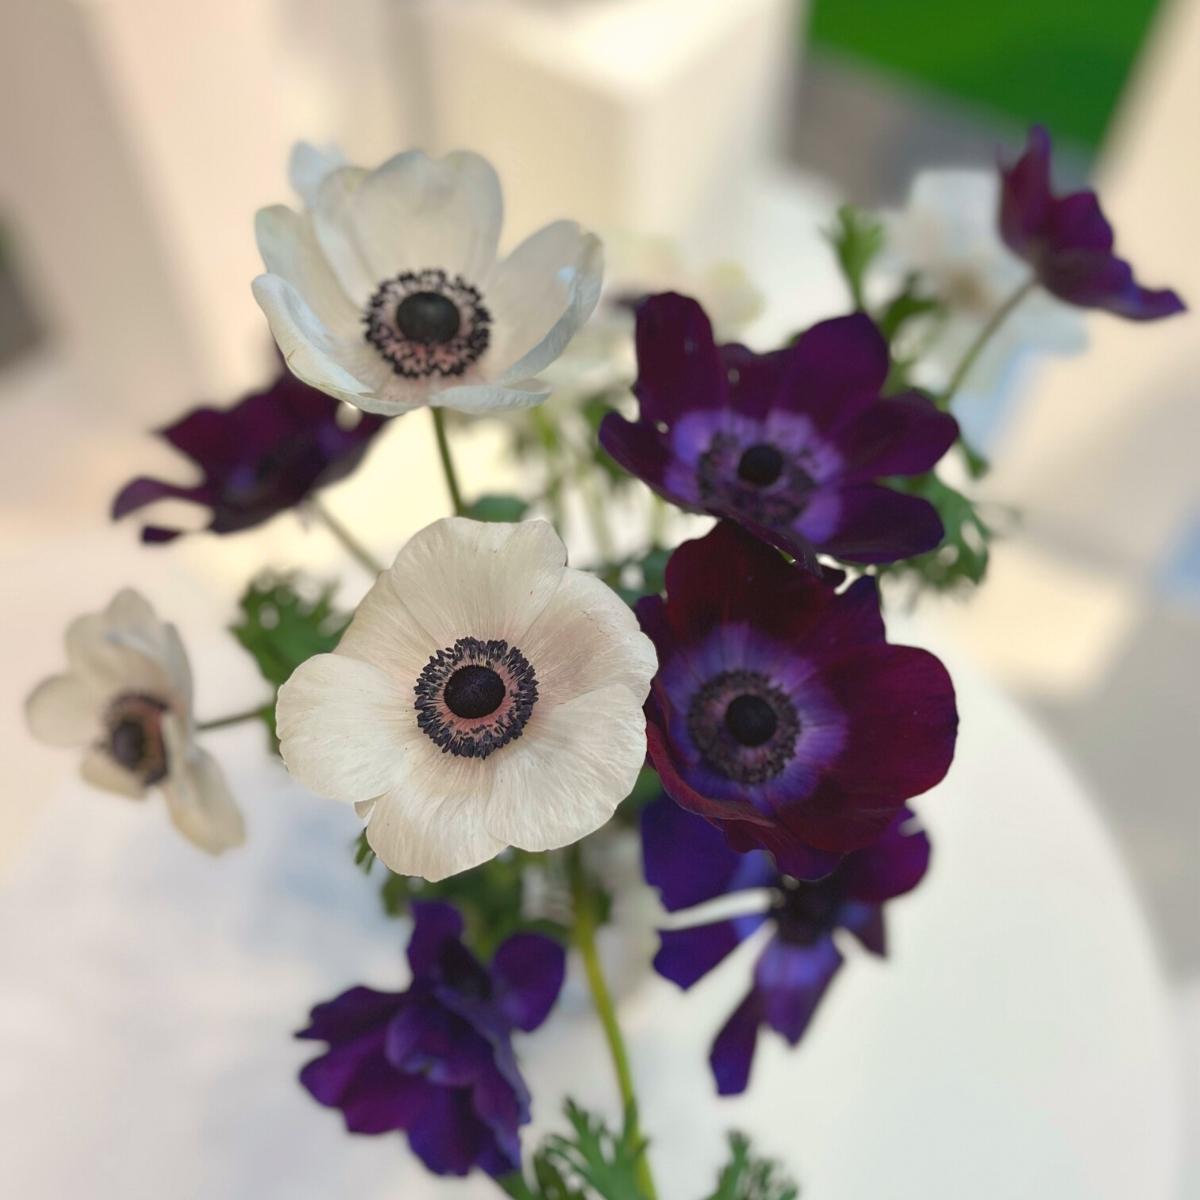 New varieties of anemones by Rosaprima on Thursd